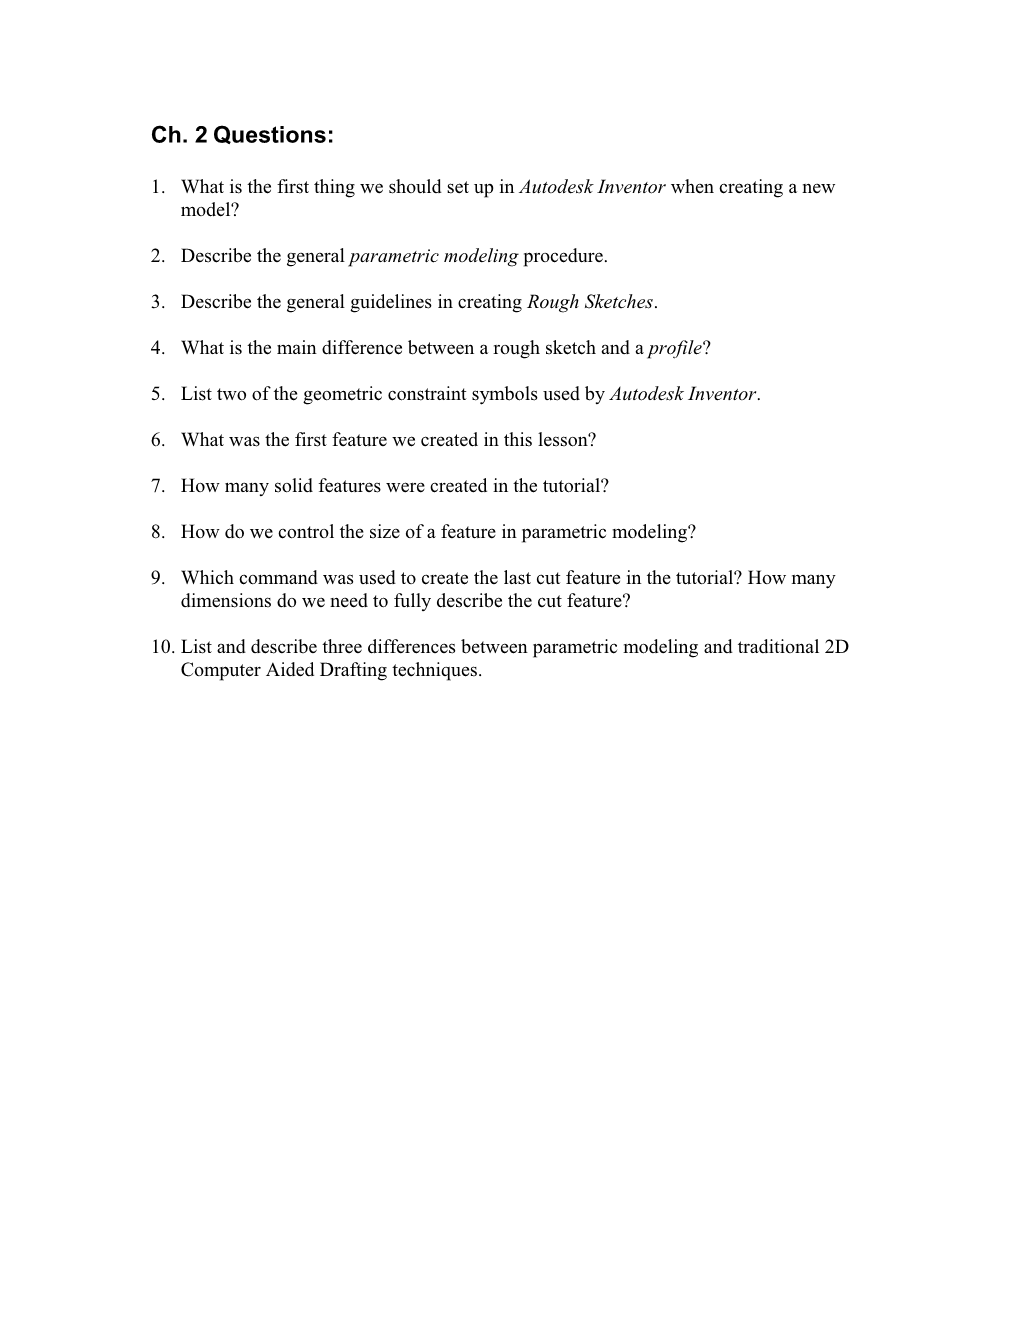 Ch. 5 Questions: (Time: 30 Minutes)